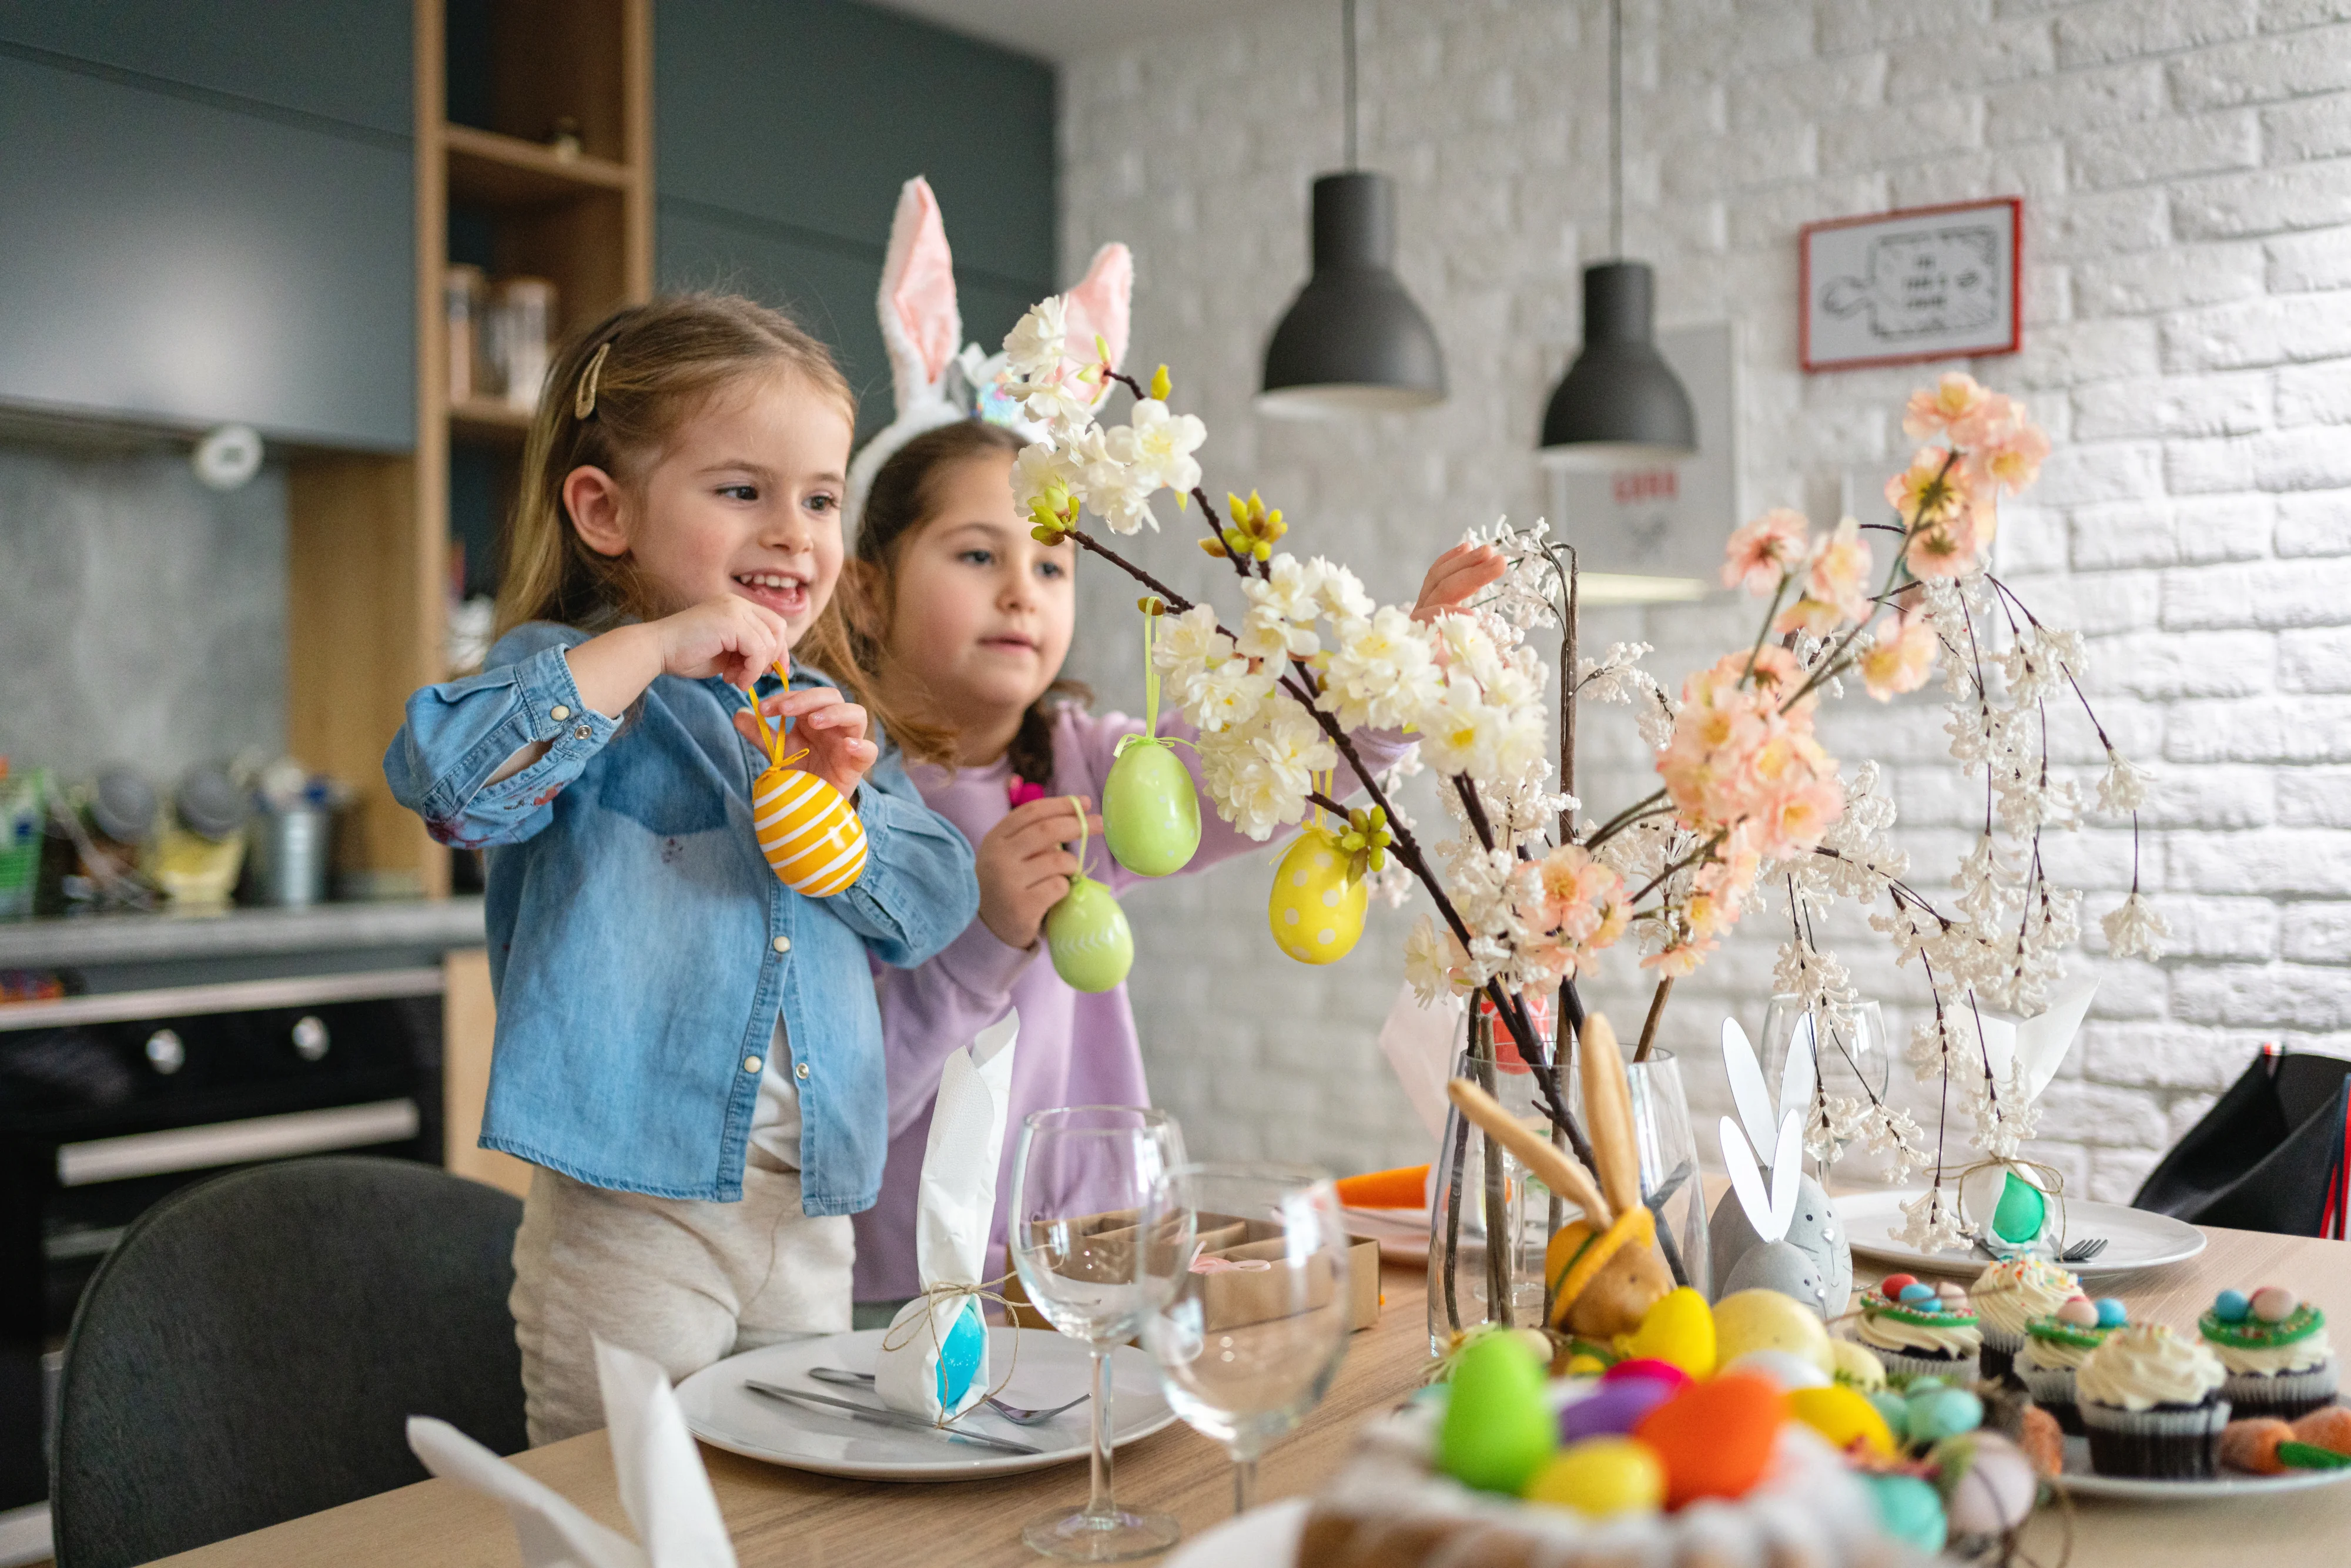 So, What to Do This Easter? Here Are 10 Ideas